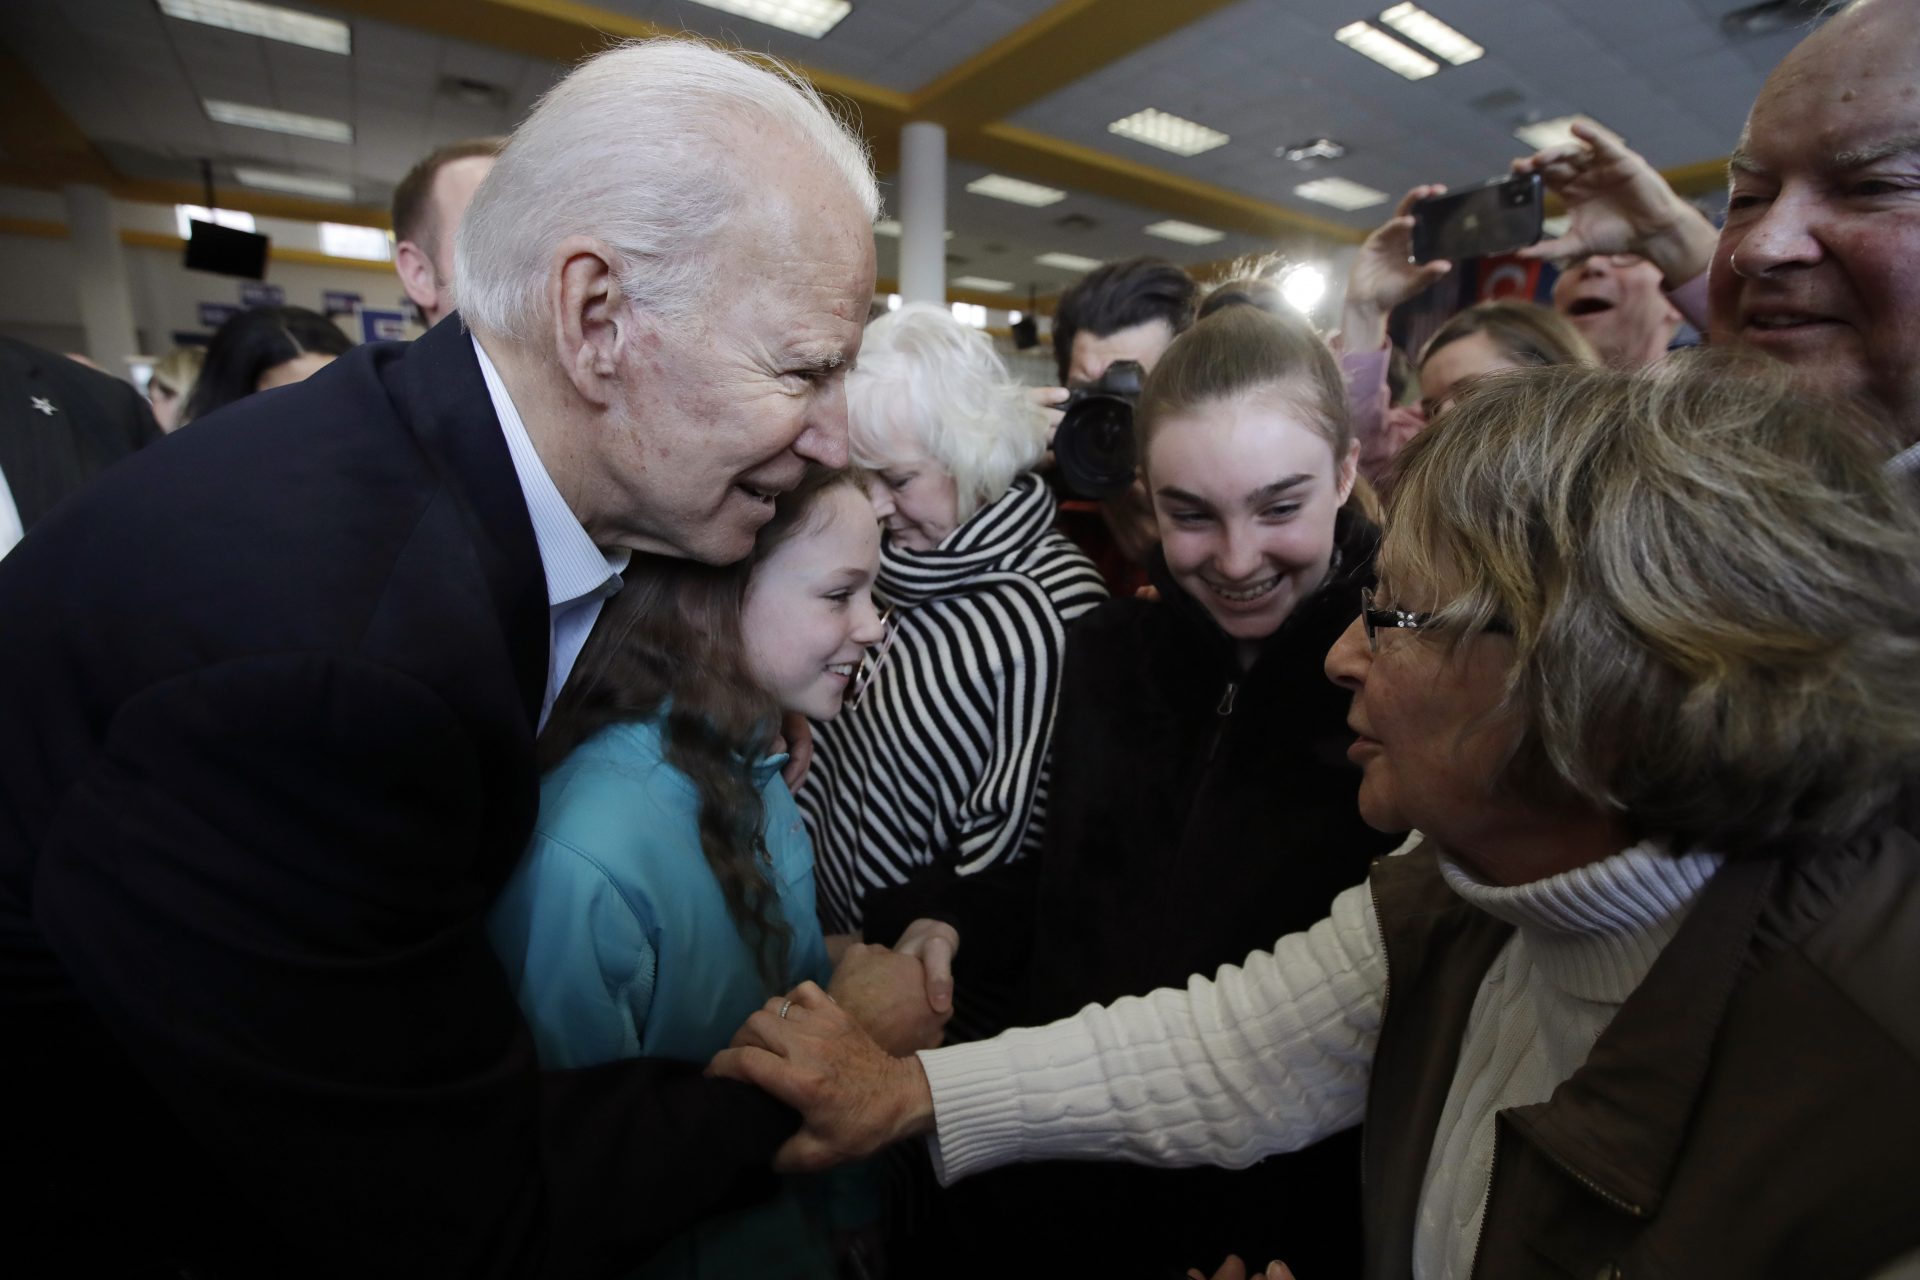 Democratic presidential candidate former Vice President Joe Biden people in the audience during a campaign event Sunday, Feb. 2, 2020, in Dubuque, Iowa.